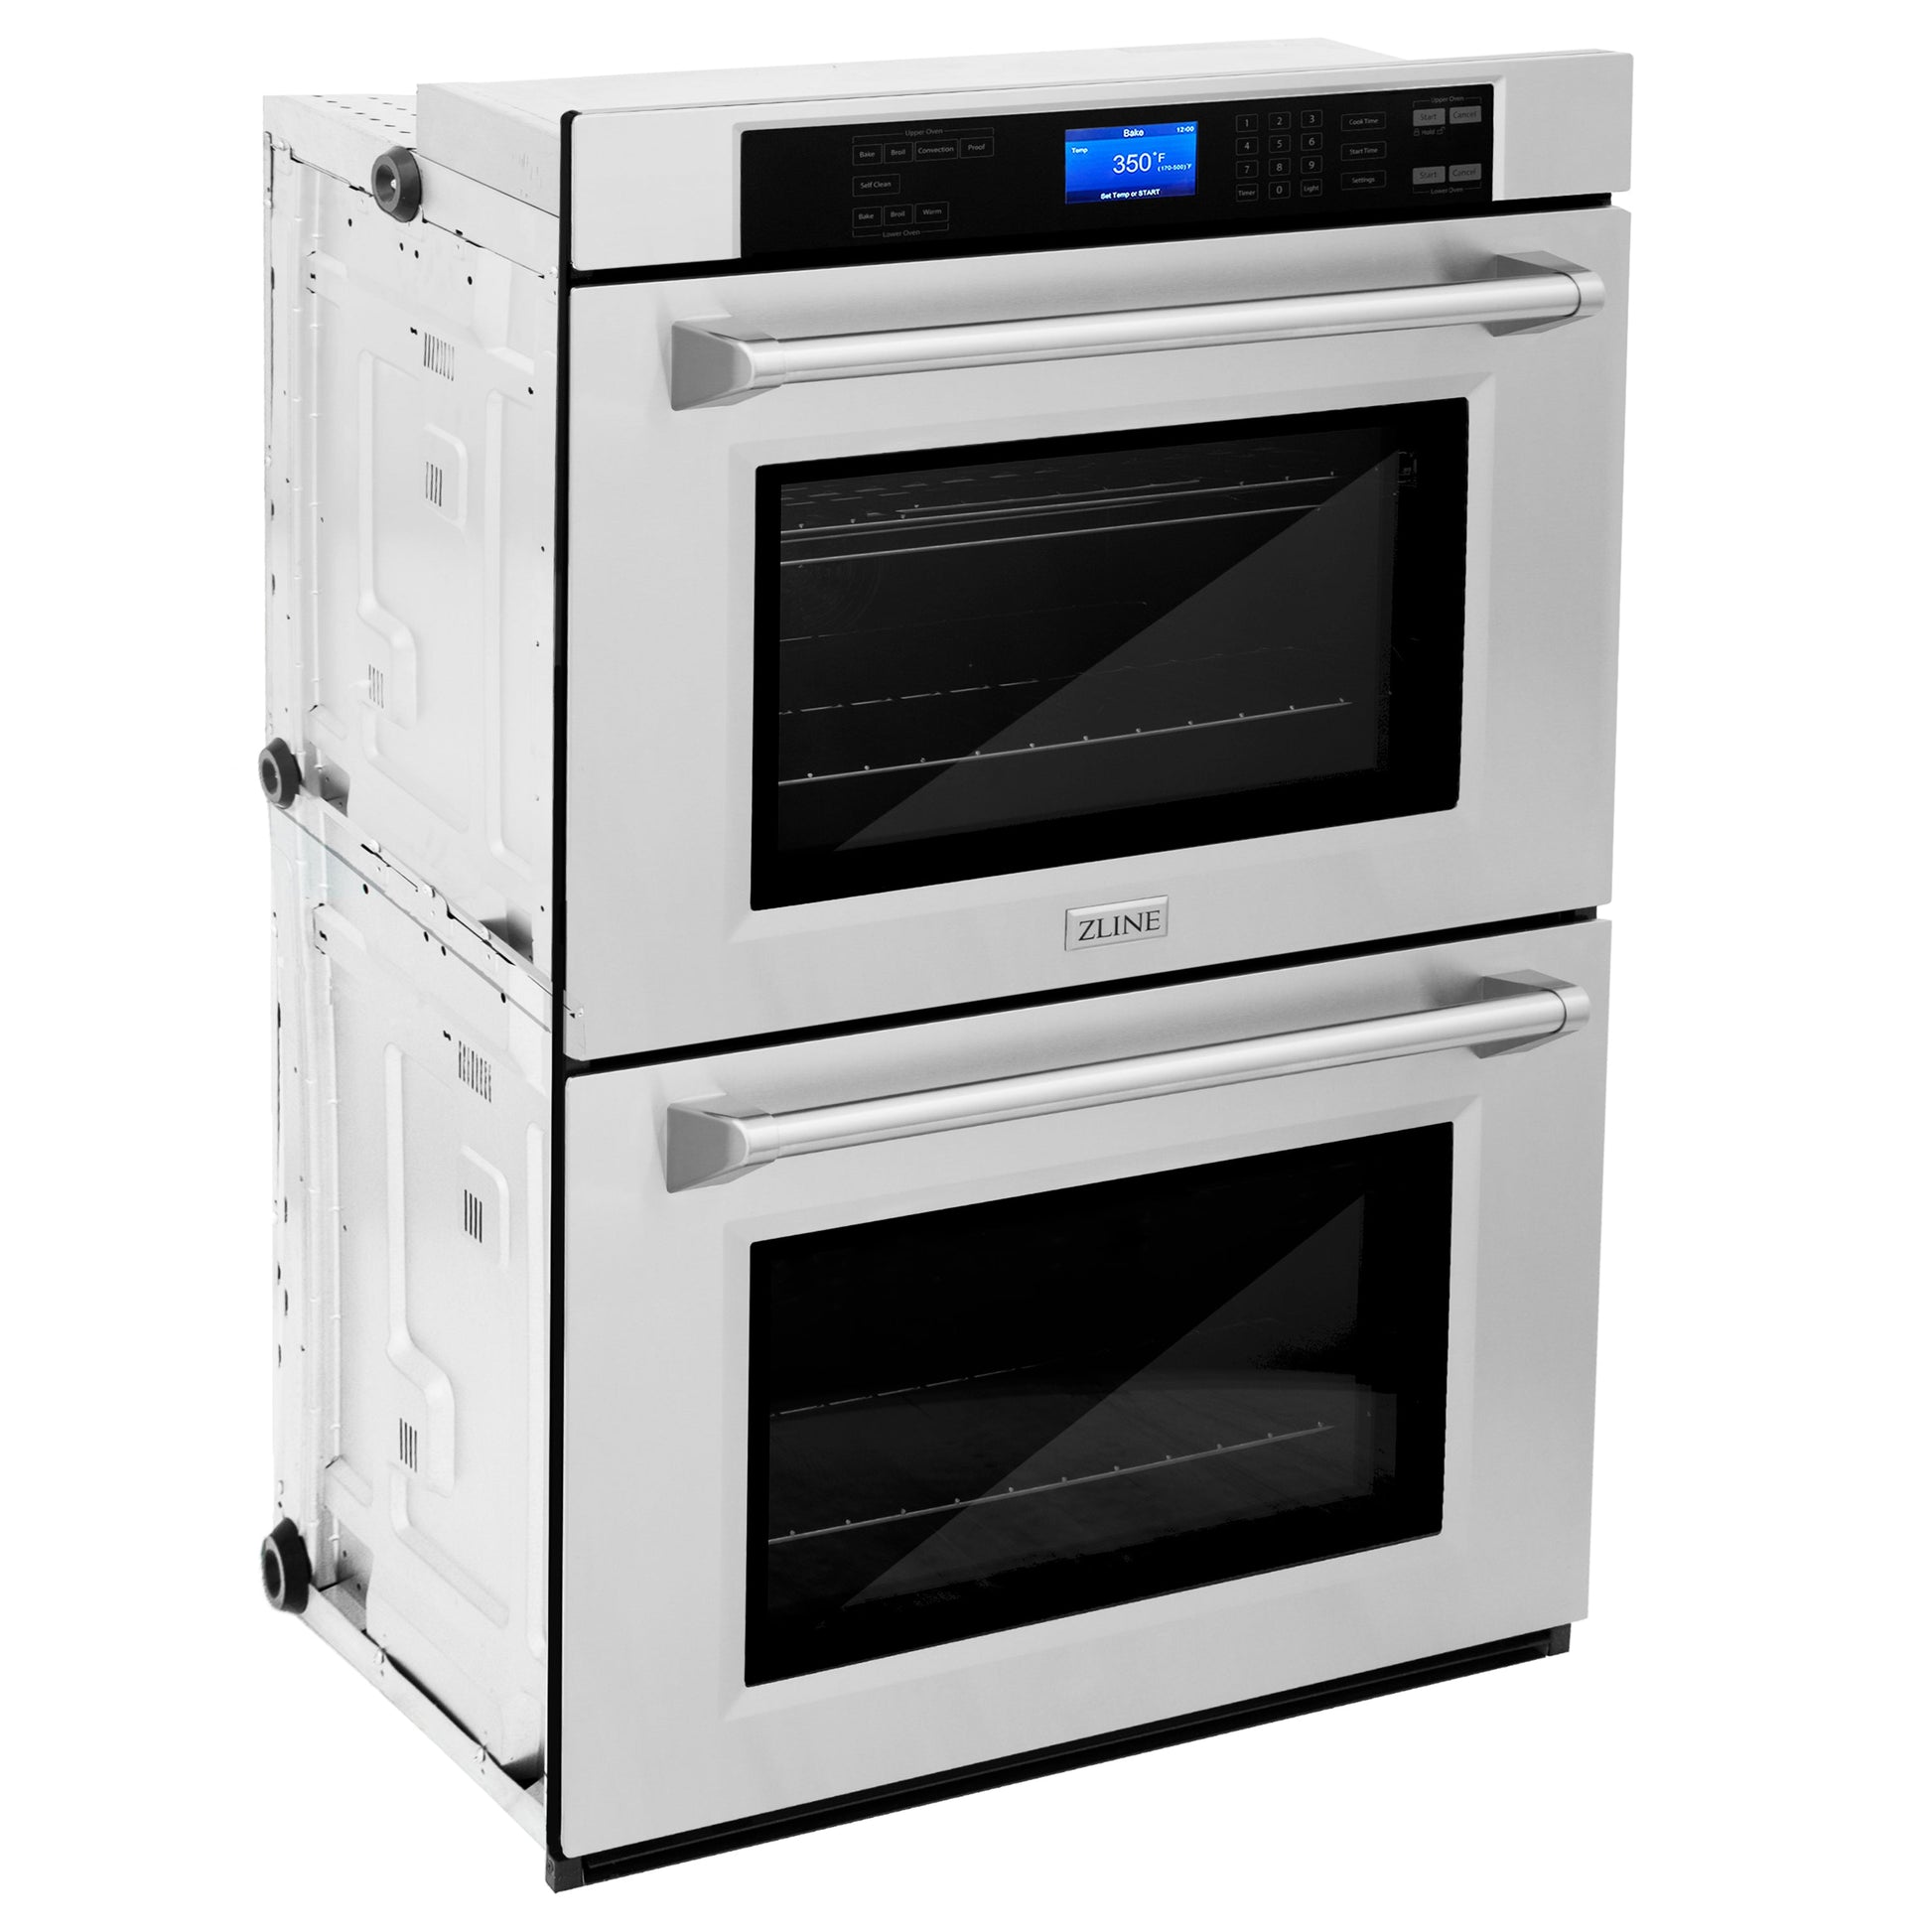 ZLINE 2-Appliance Kitchen Package with 48" Stainless Steel Rangetop and 30" Double Wall Oven